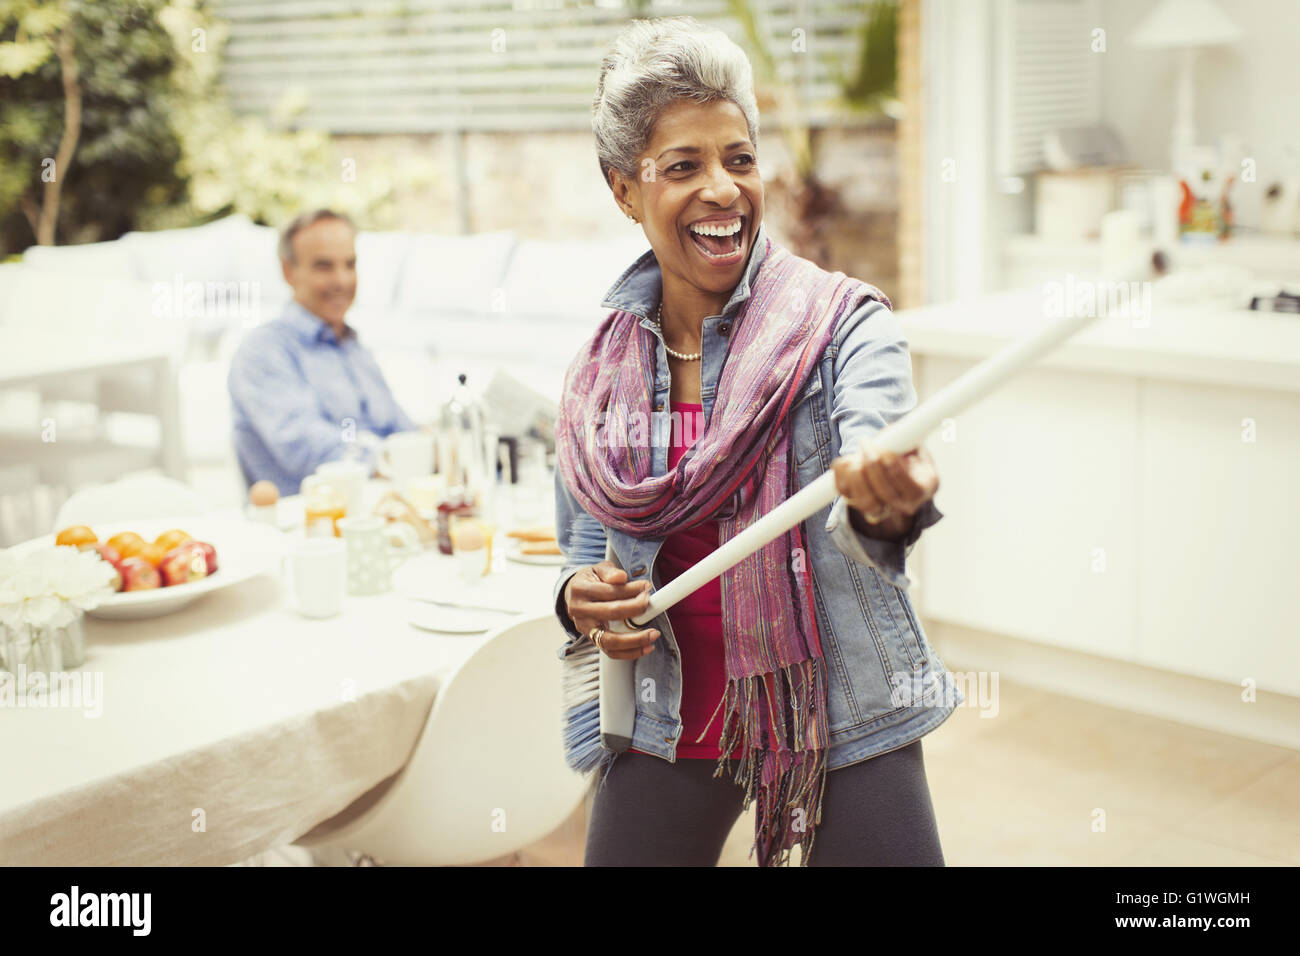 Portrait playful mature woman playing air guitar with stick in kitchen Stock Photo